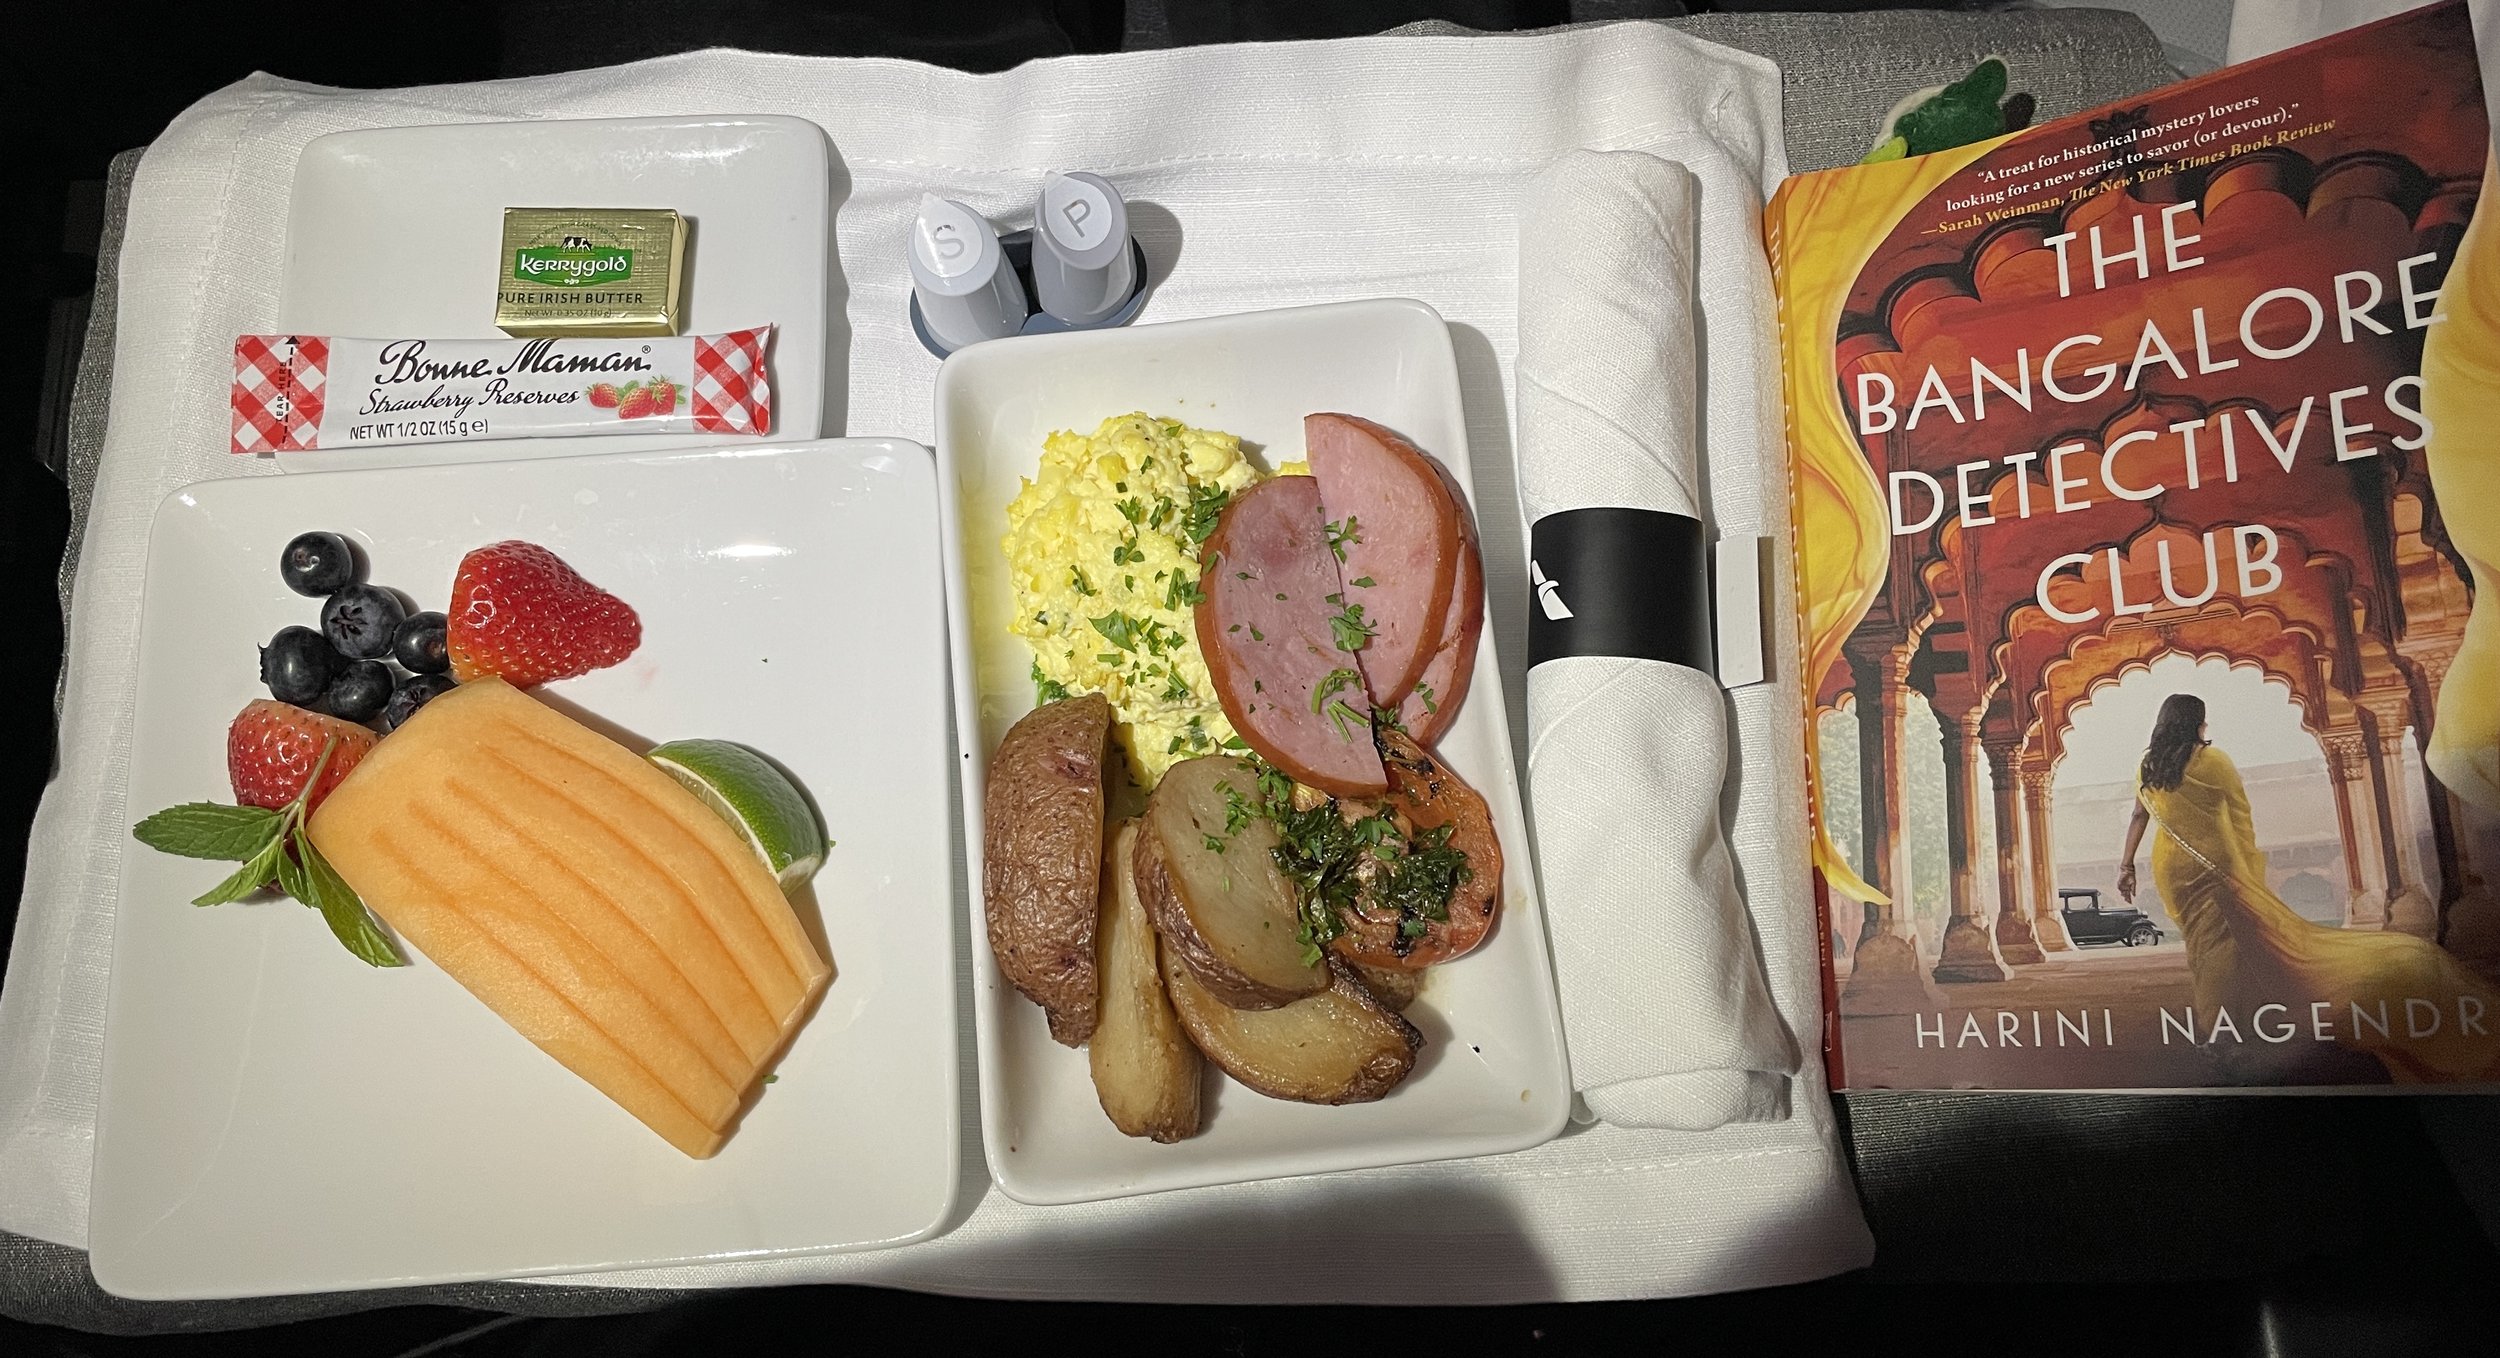  We were unexpectedly bumped up to business class.  Very classy.  Too bad it didn’t reoccur for our return to SFO.  Those who know me will know the ham was brushed aside.  The book was okay.  It’s not well written &amp; very wordy but gives quite an 